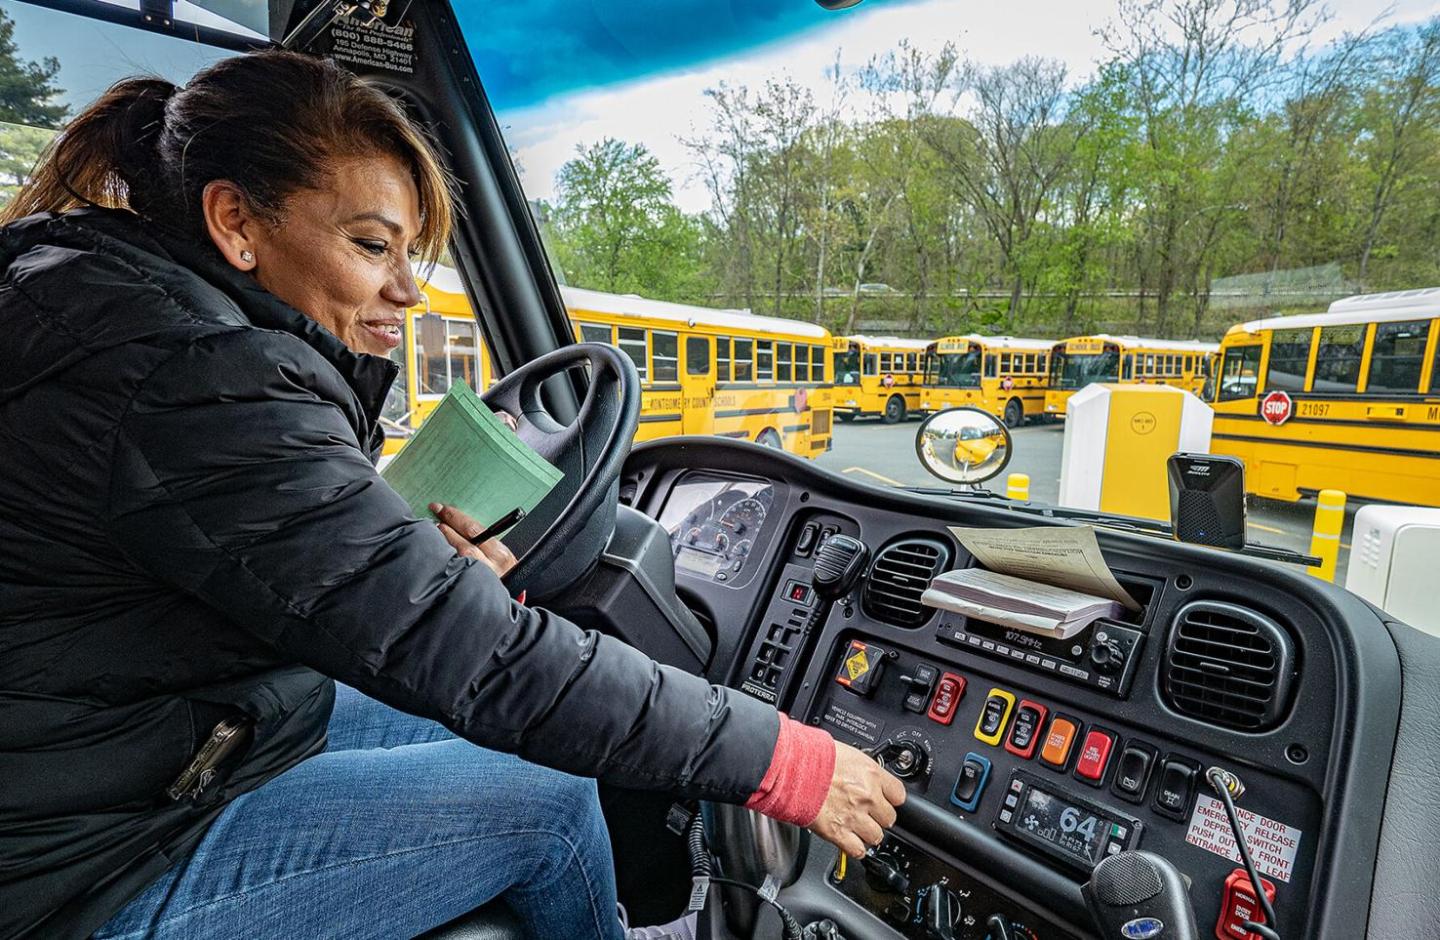 Carmen Cortez starting up the electric school bus she drives